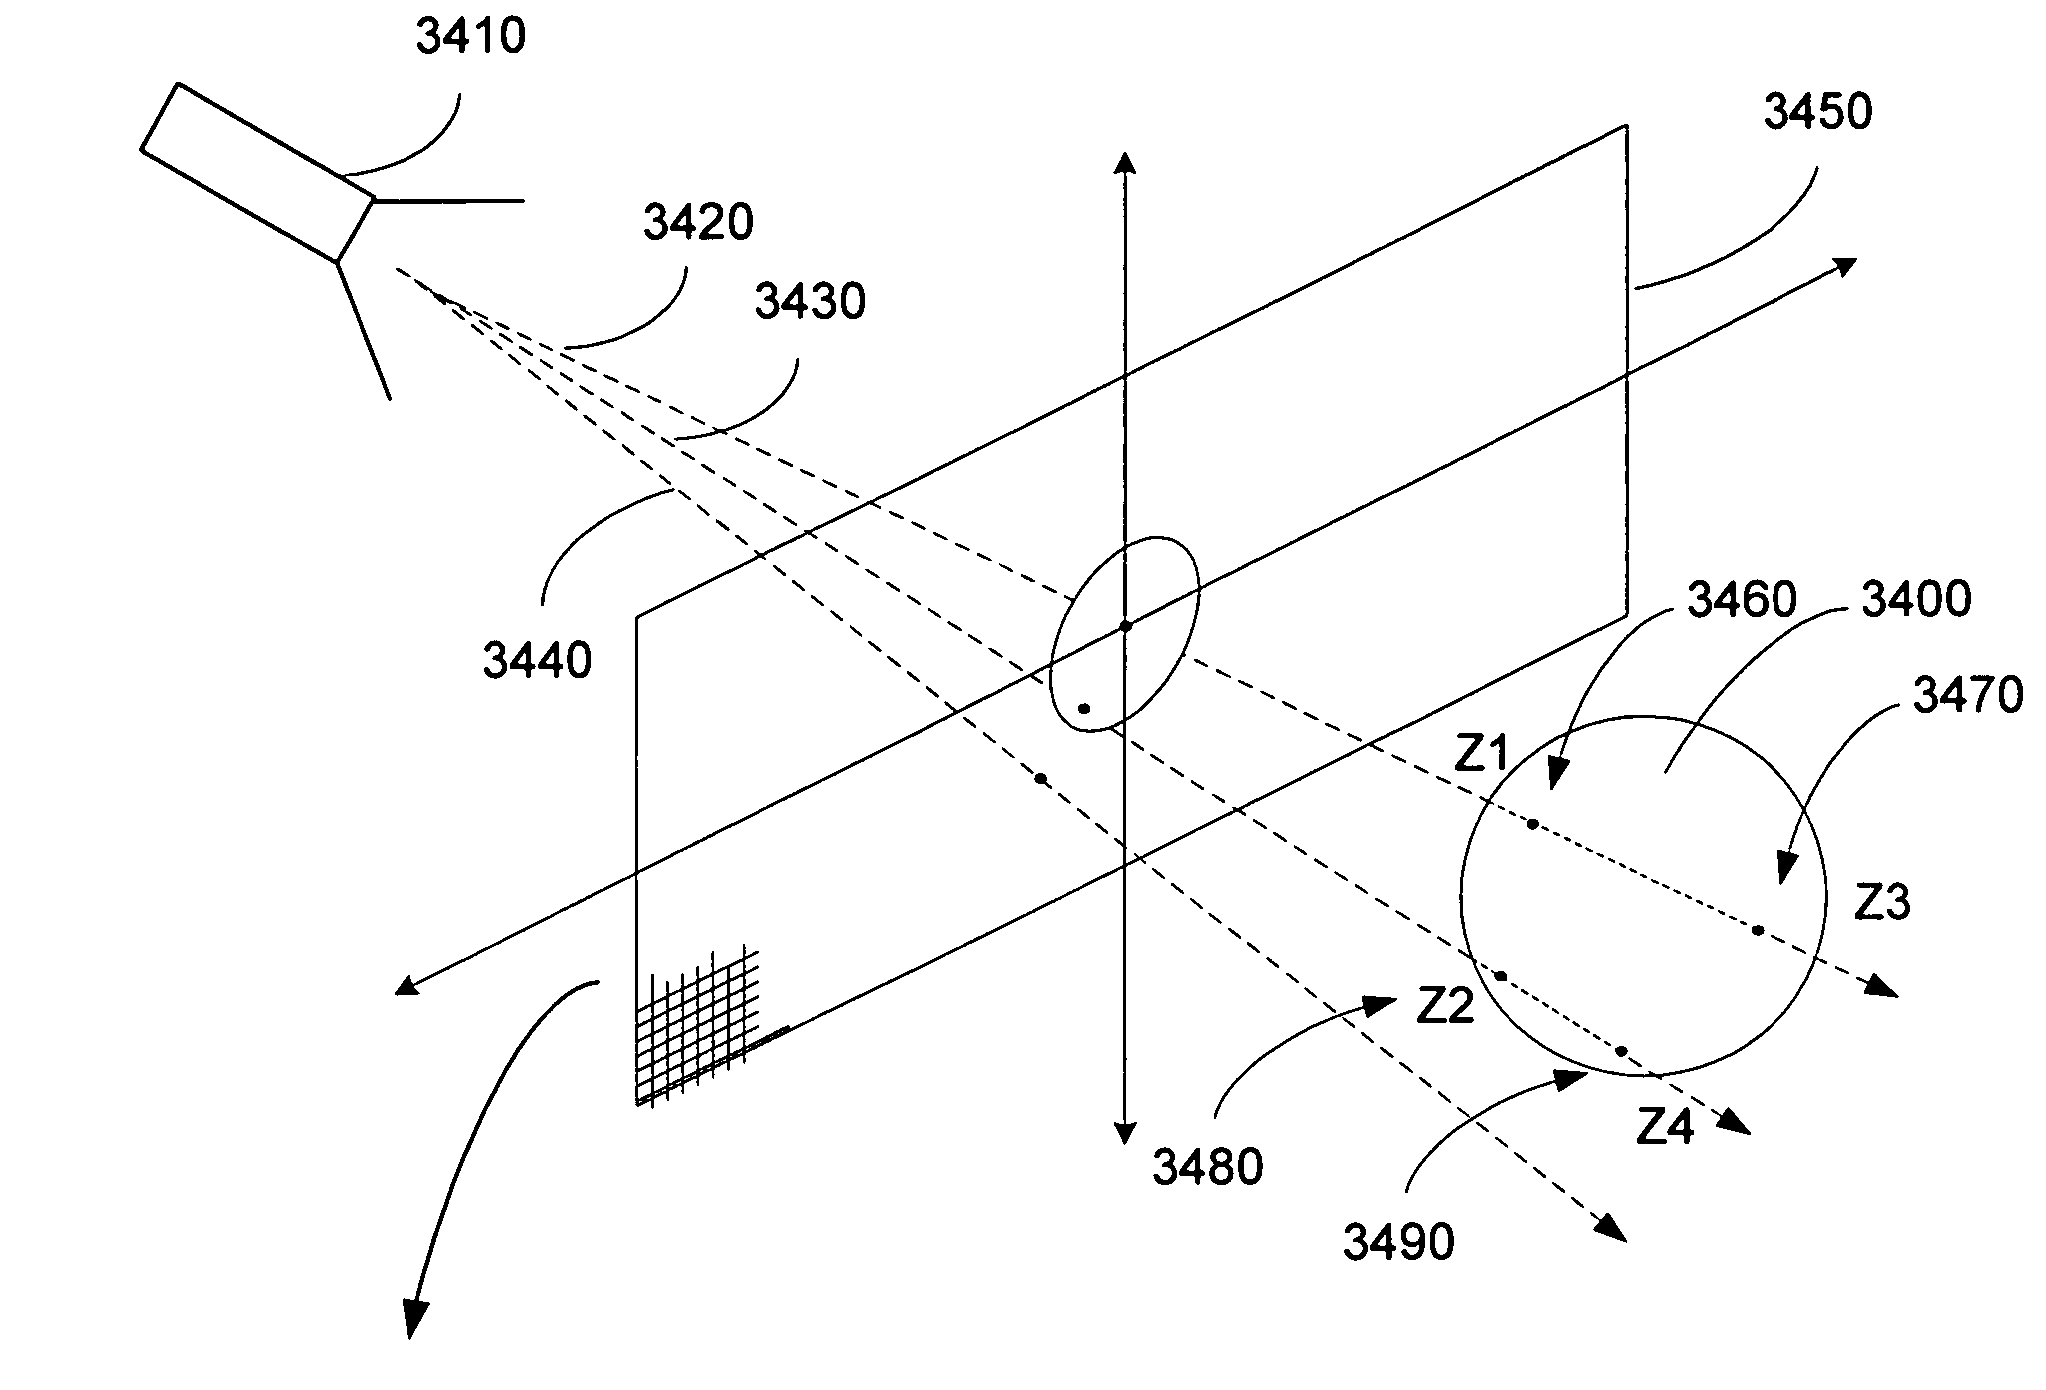 Subsurface scattering approximation methods and apparatus